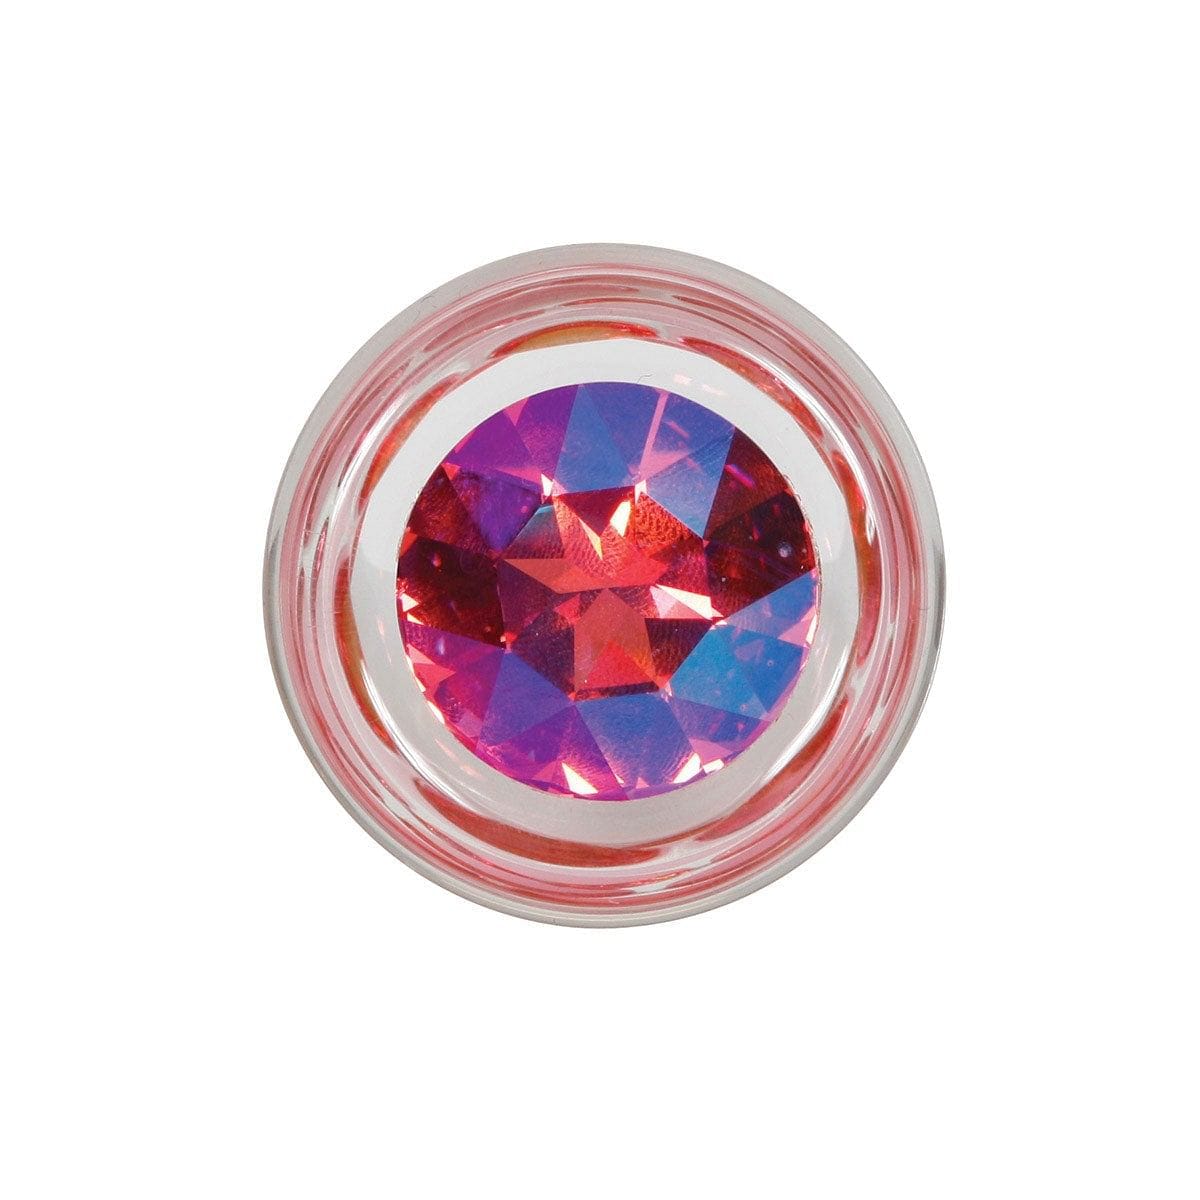 Pineapple Delight Glass Plug w Pink Crystal by Crystal Delights - rolik